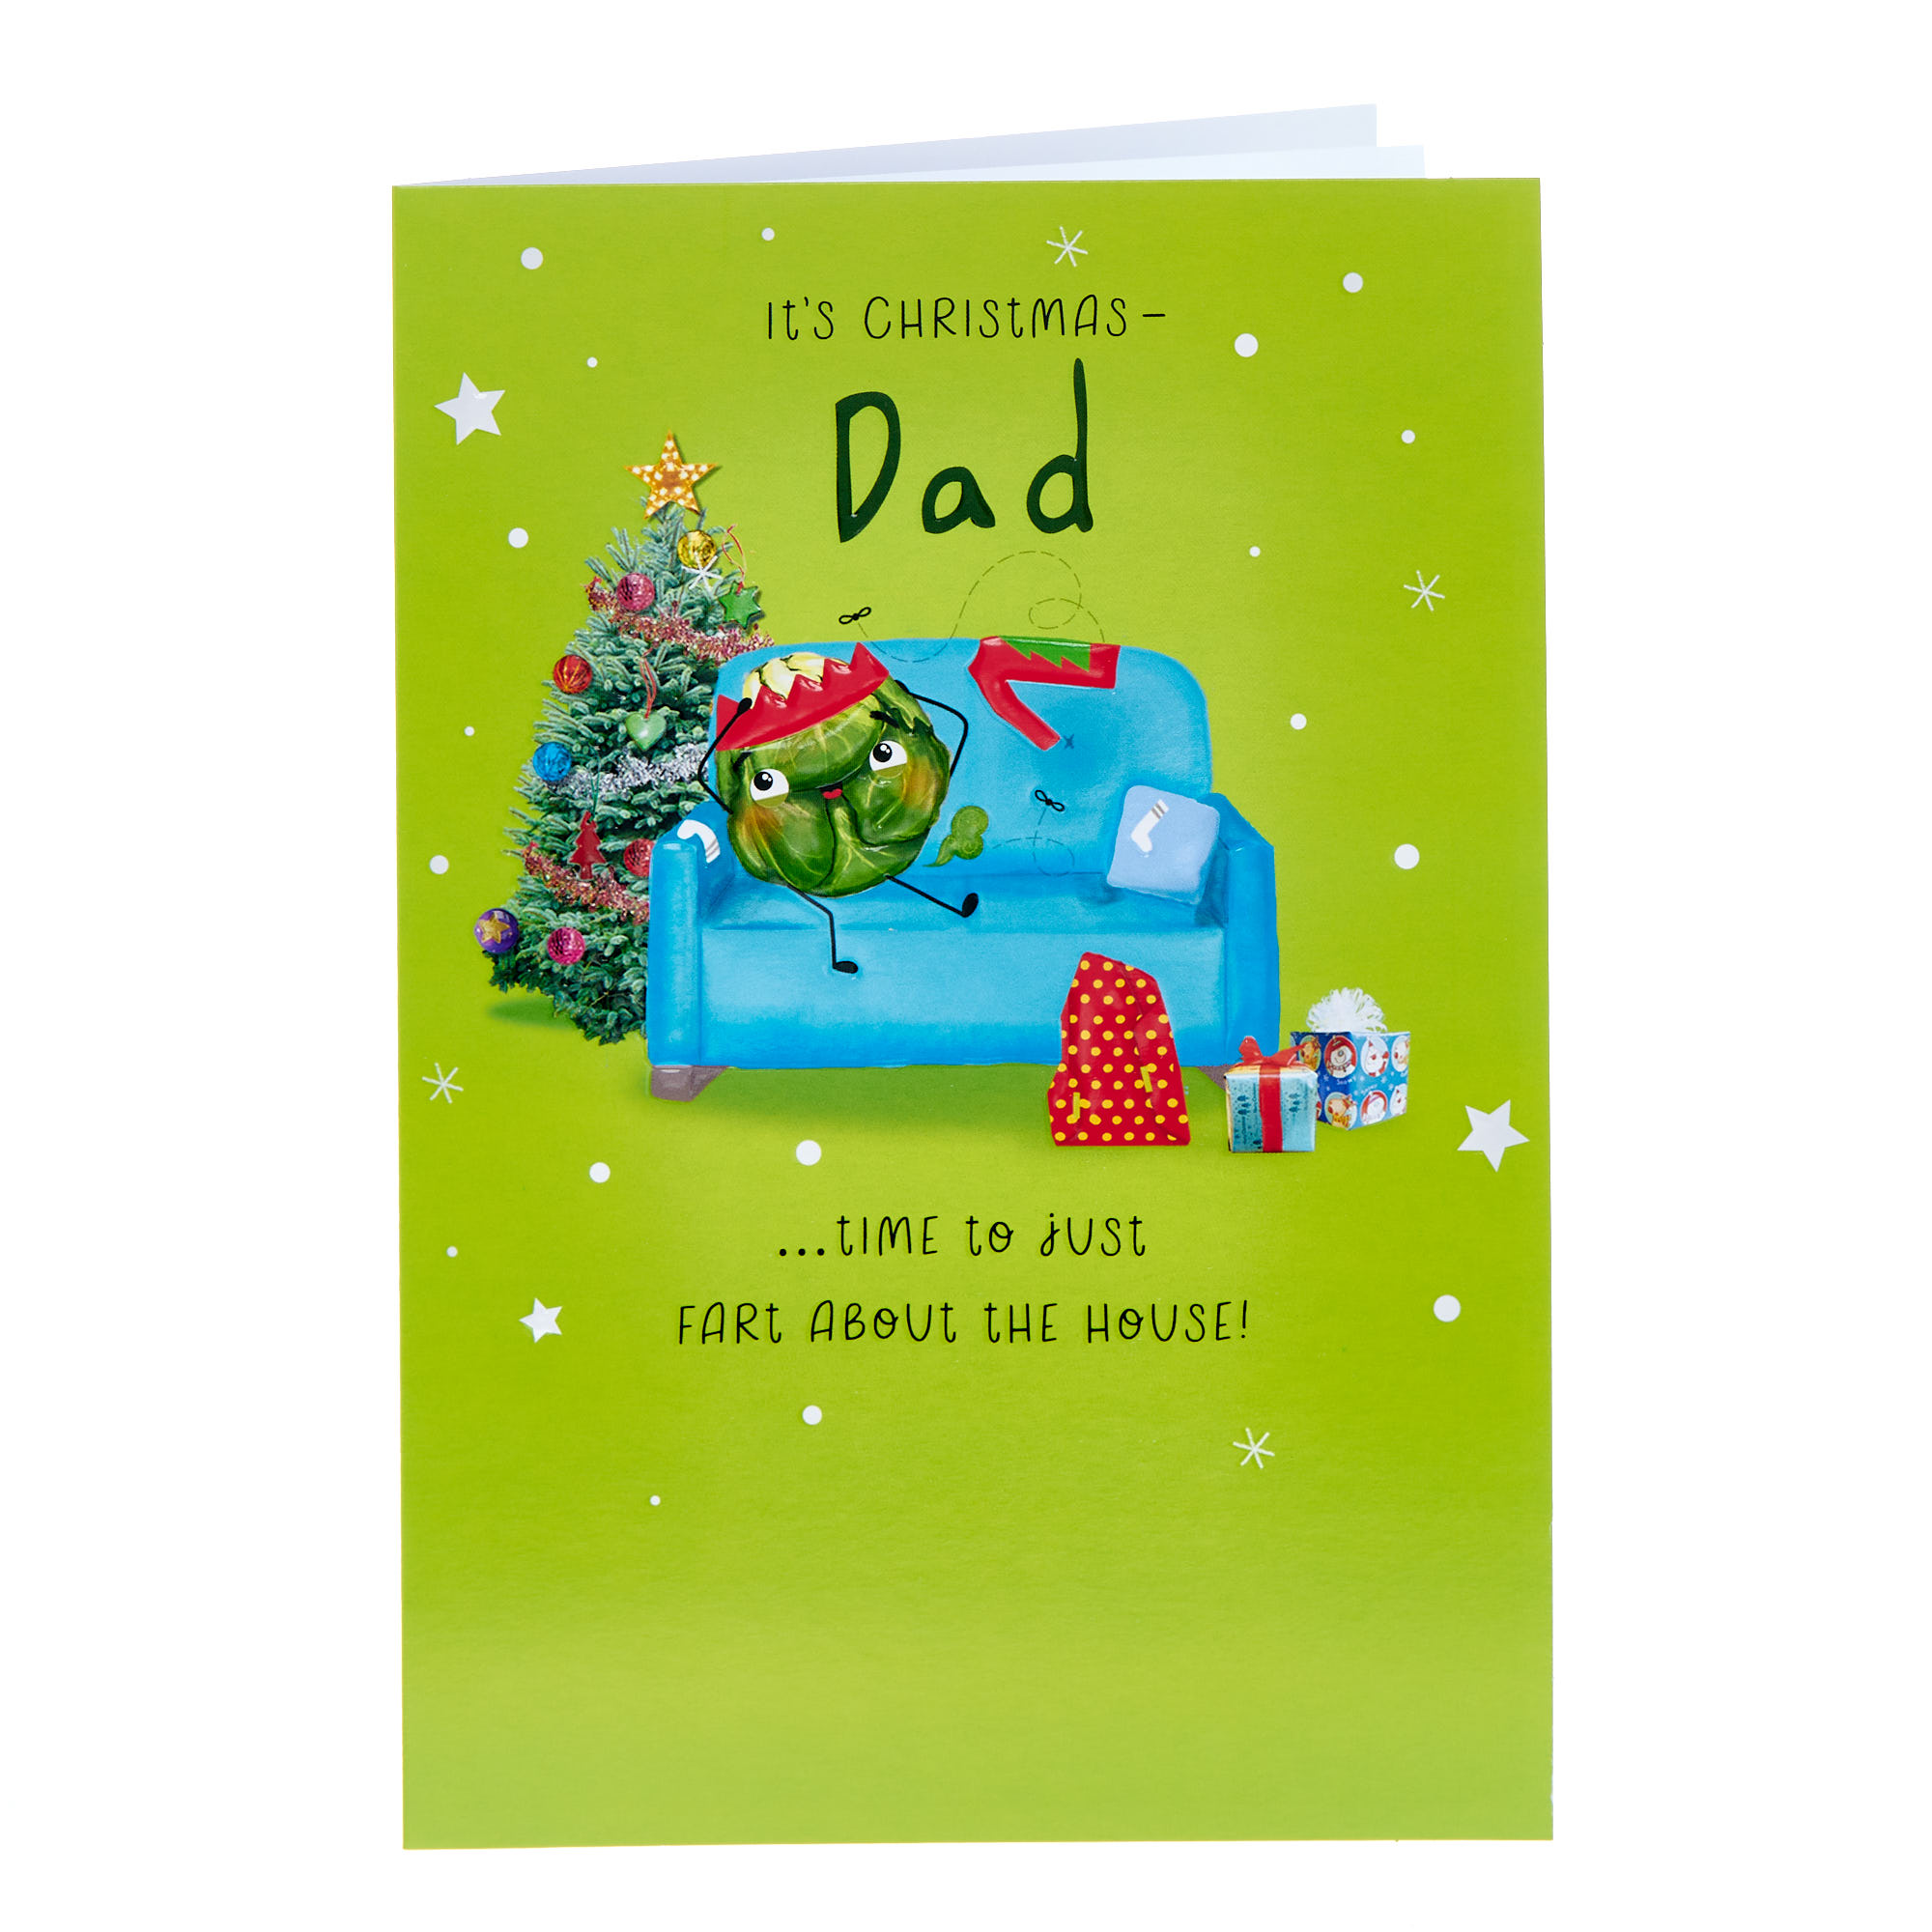 Dad Fart About The House Christmas Card